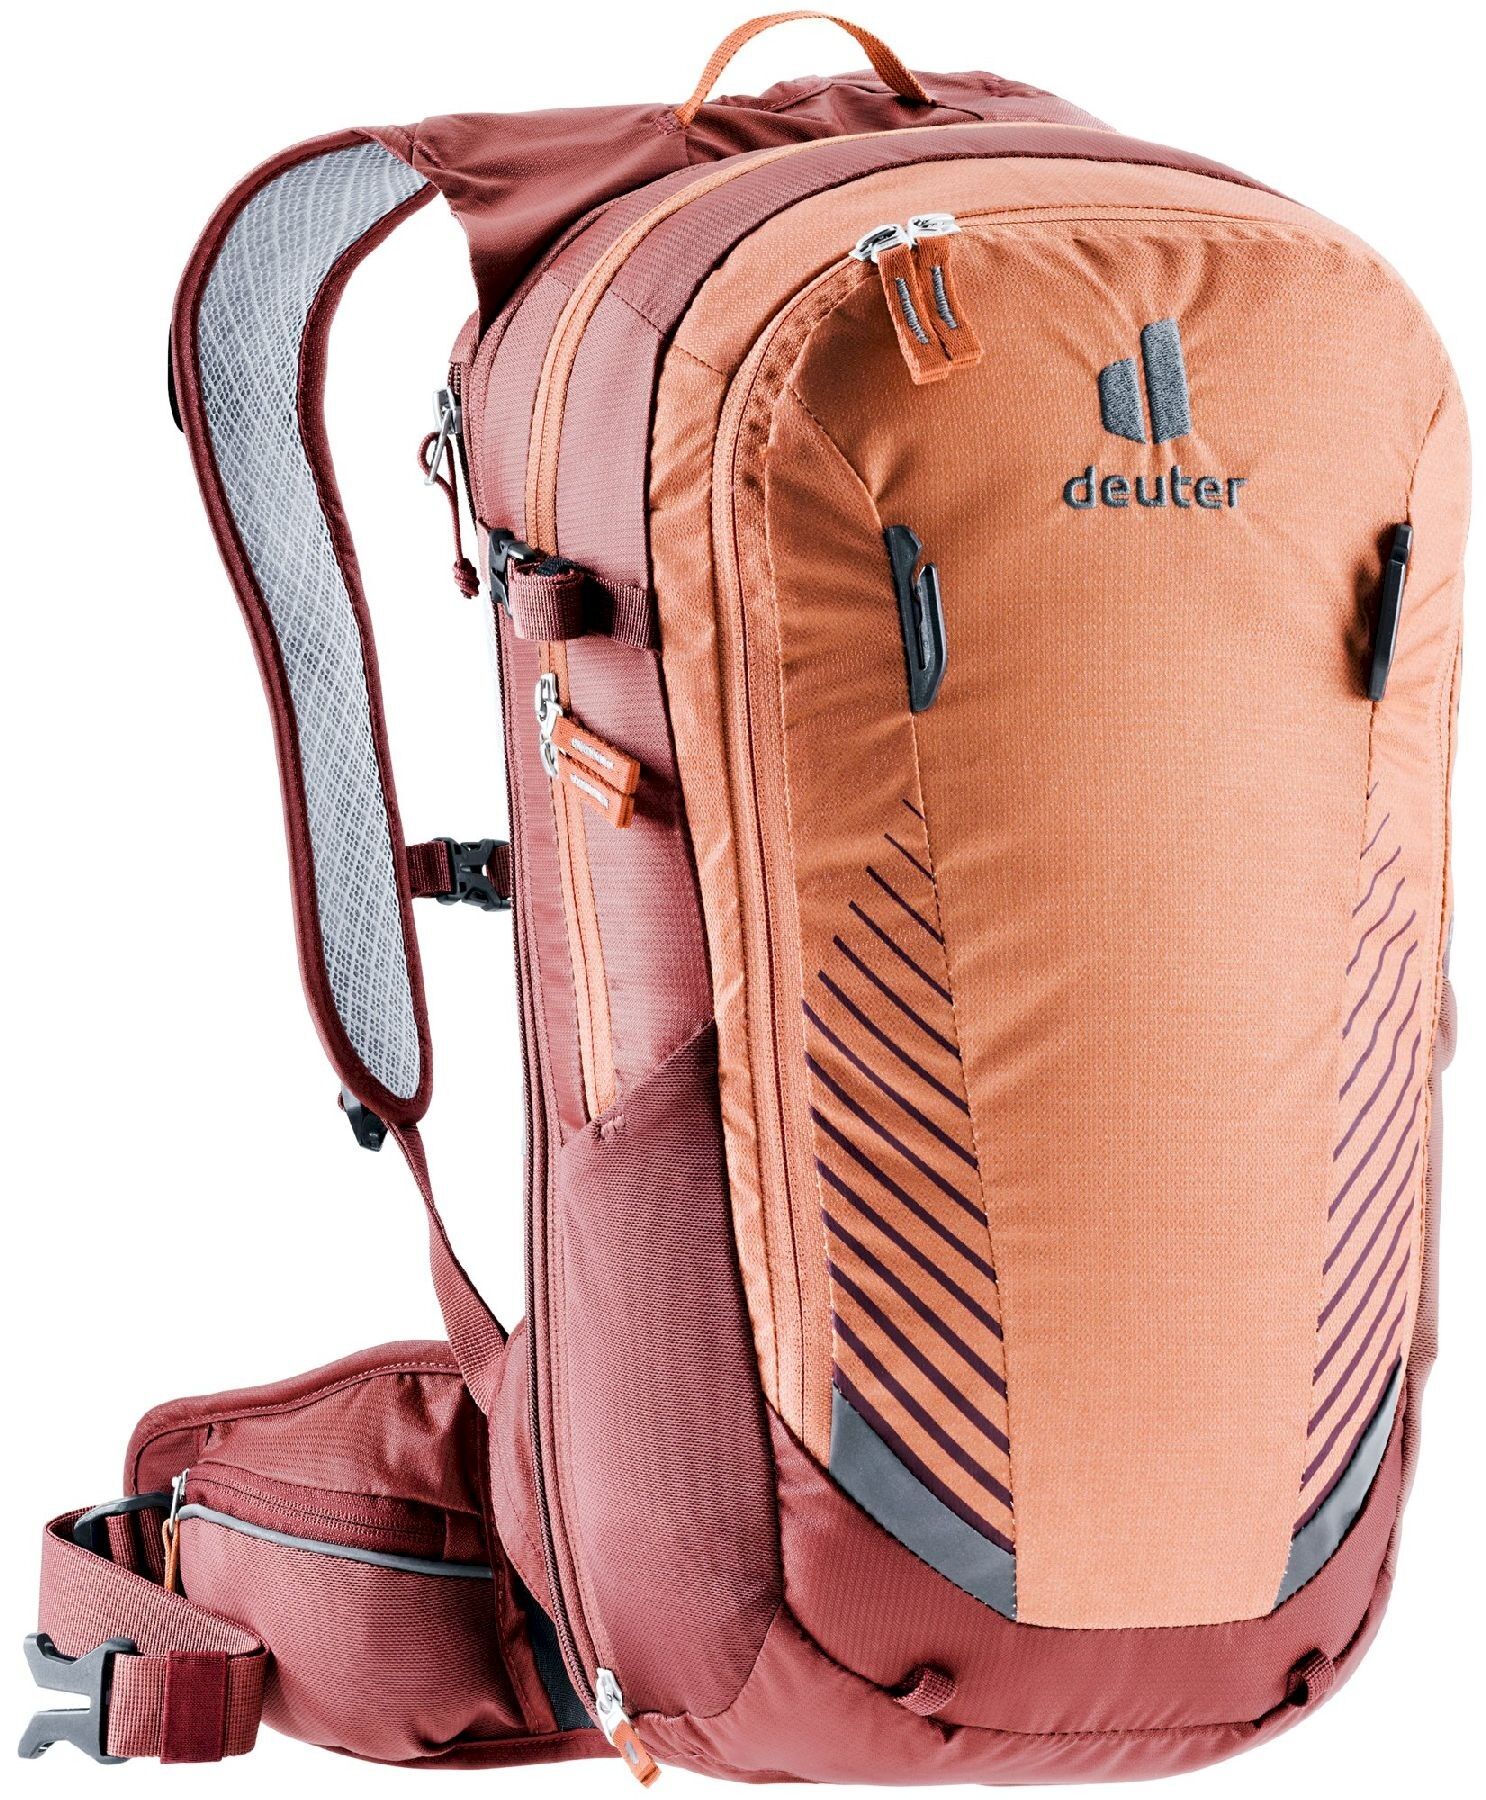 Deuter Compact EXP 12 SL - Cycling backpack - Women's